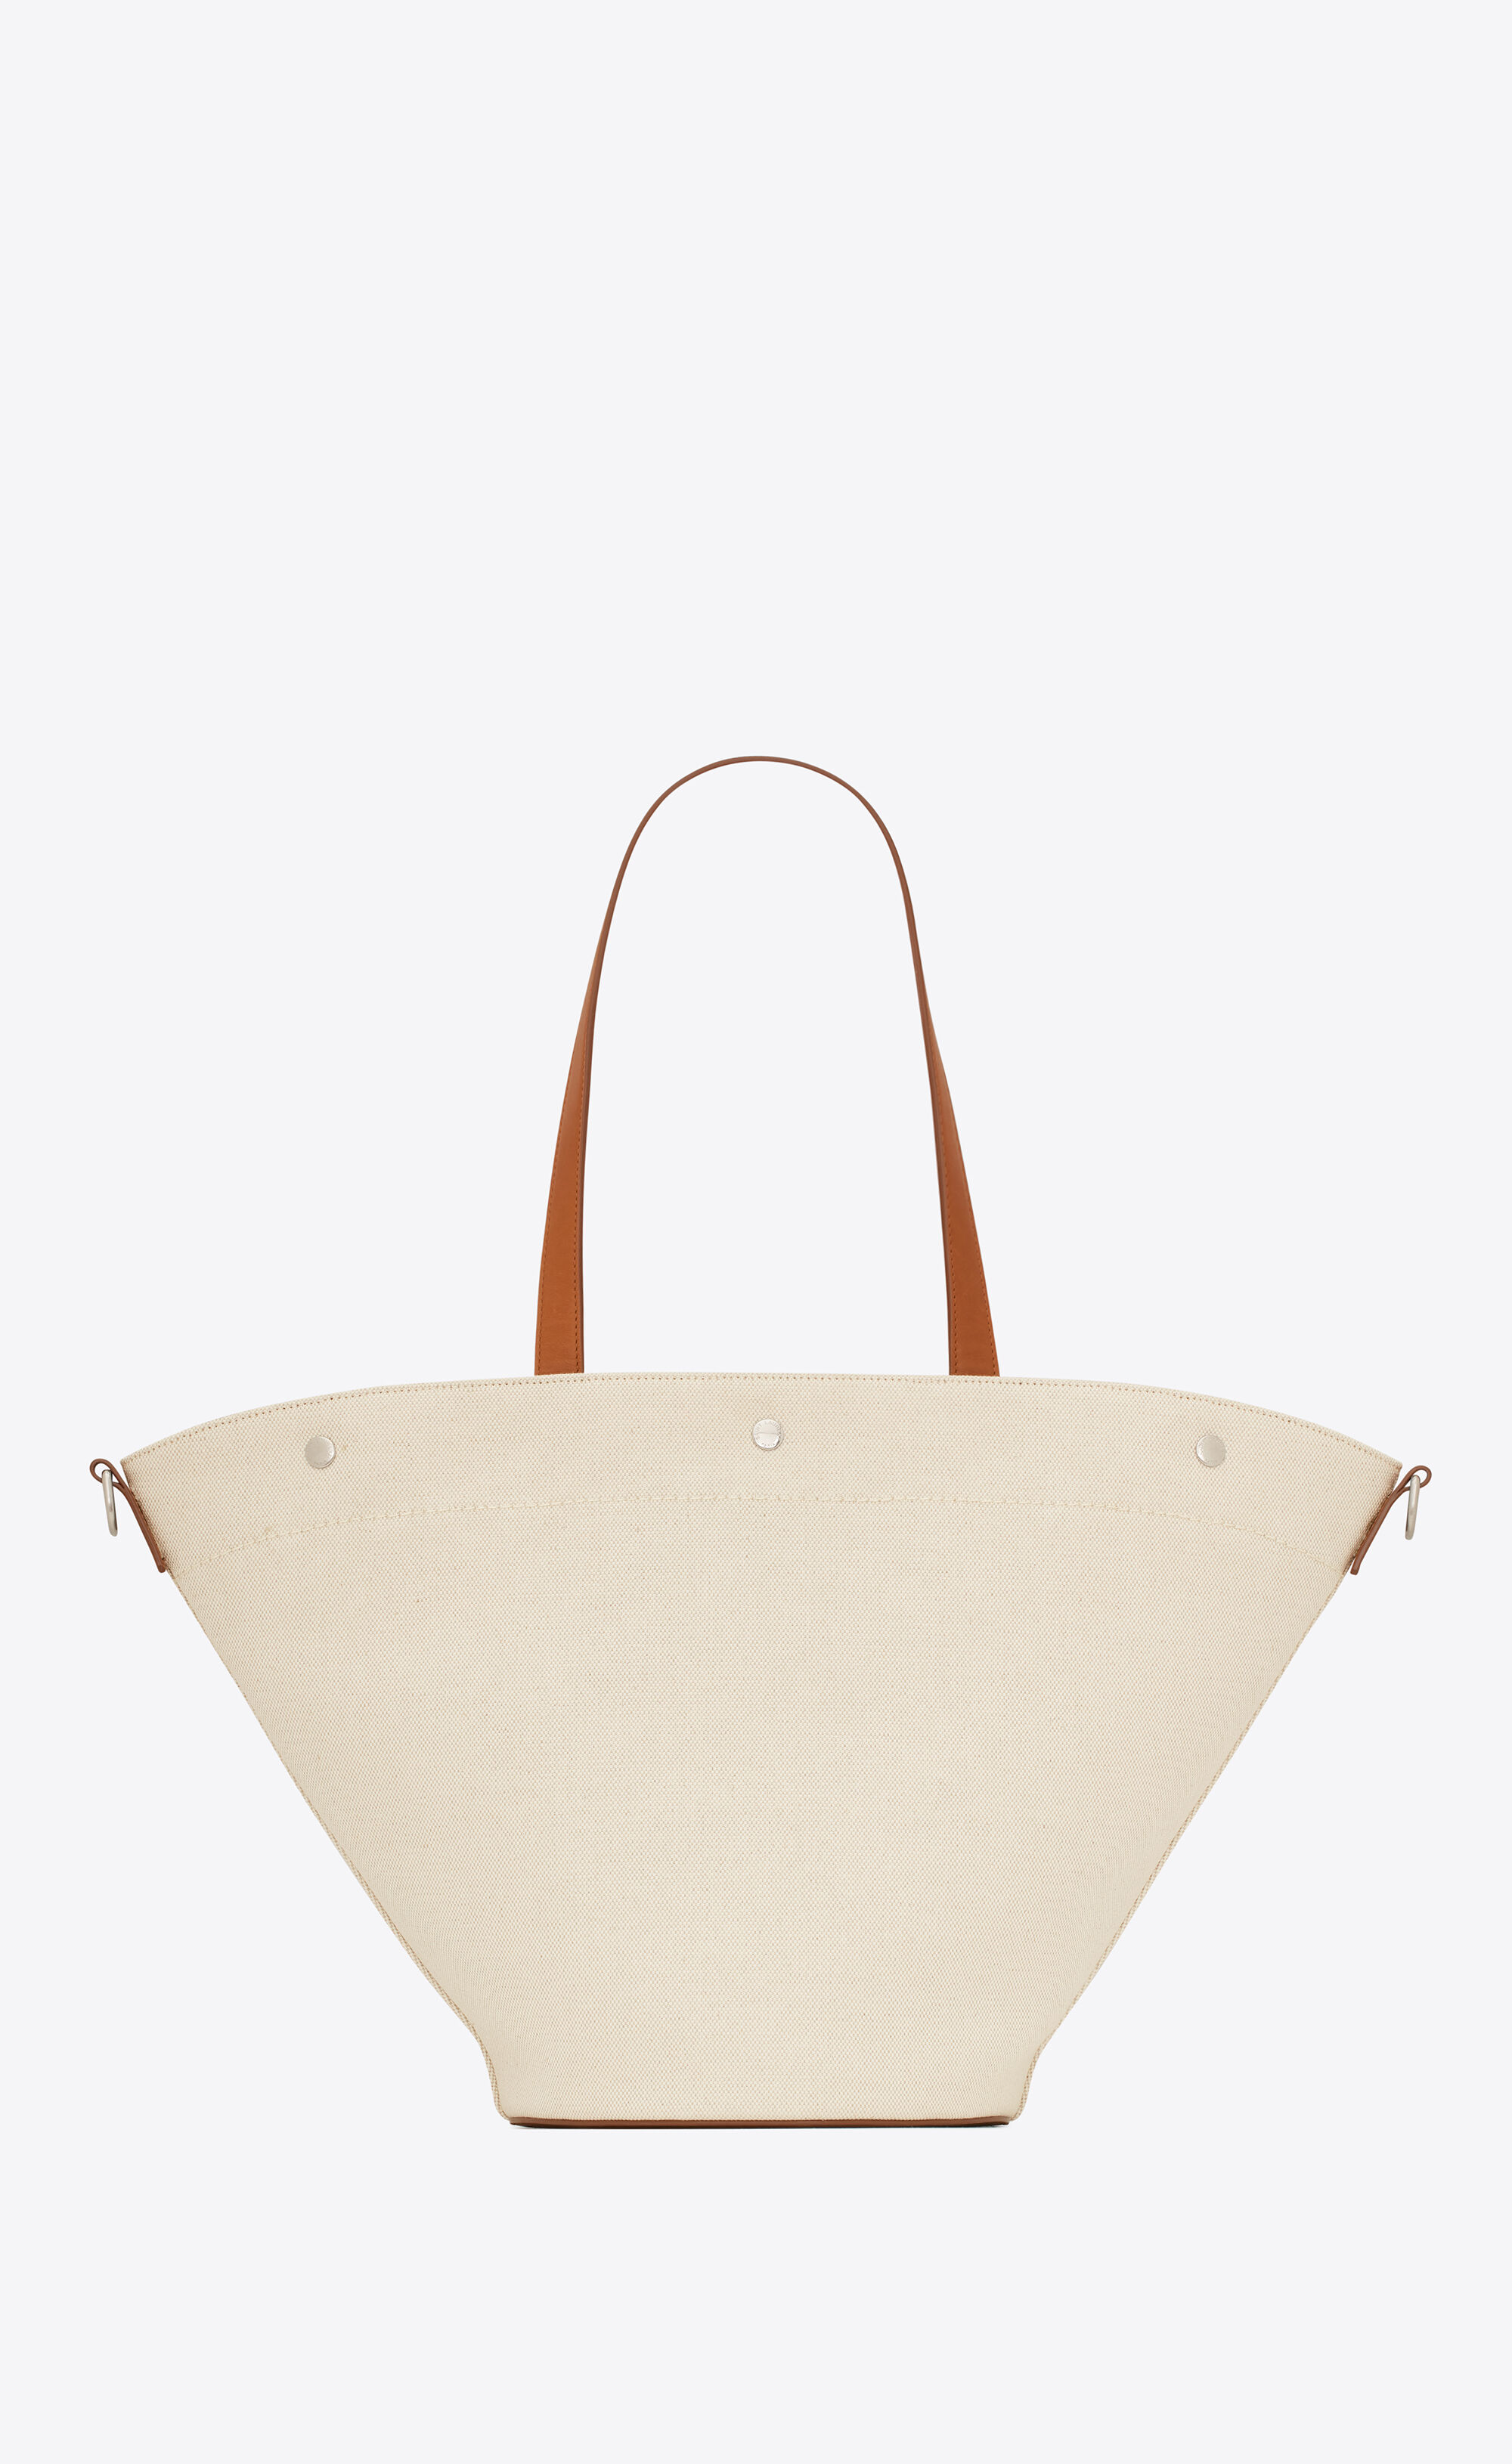 rive gauche tote bag in canvas and vintage leather